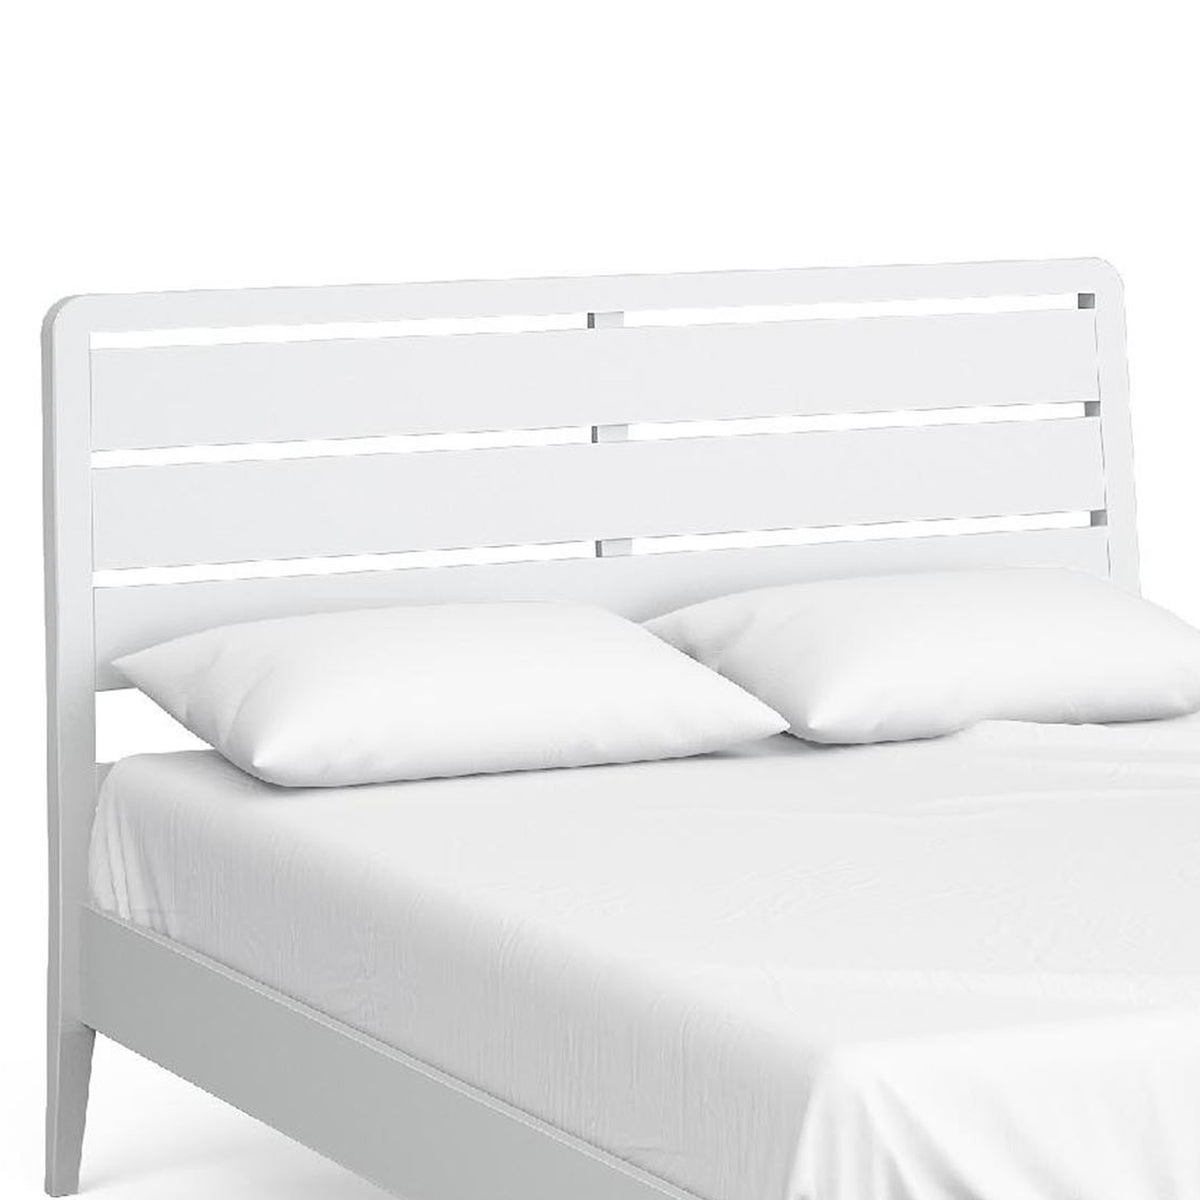 Chester White Painted 4ft 6 Double Bed Frame - Close up of headboard